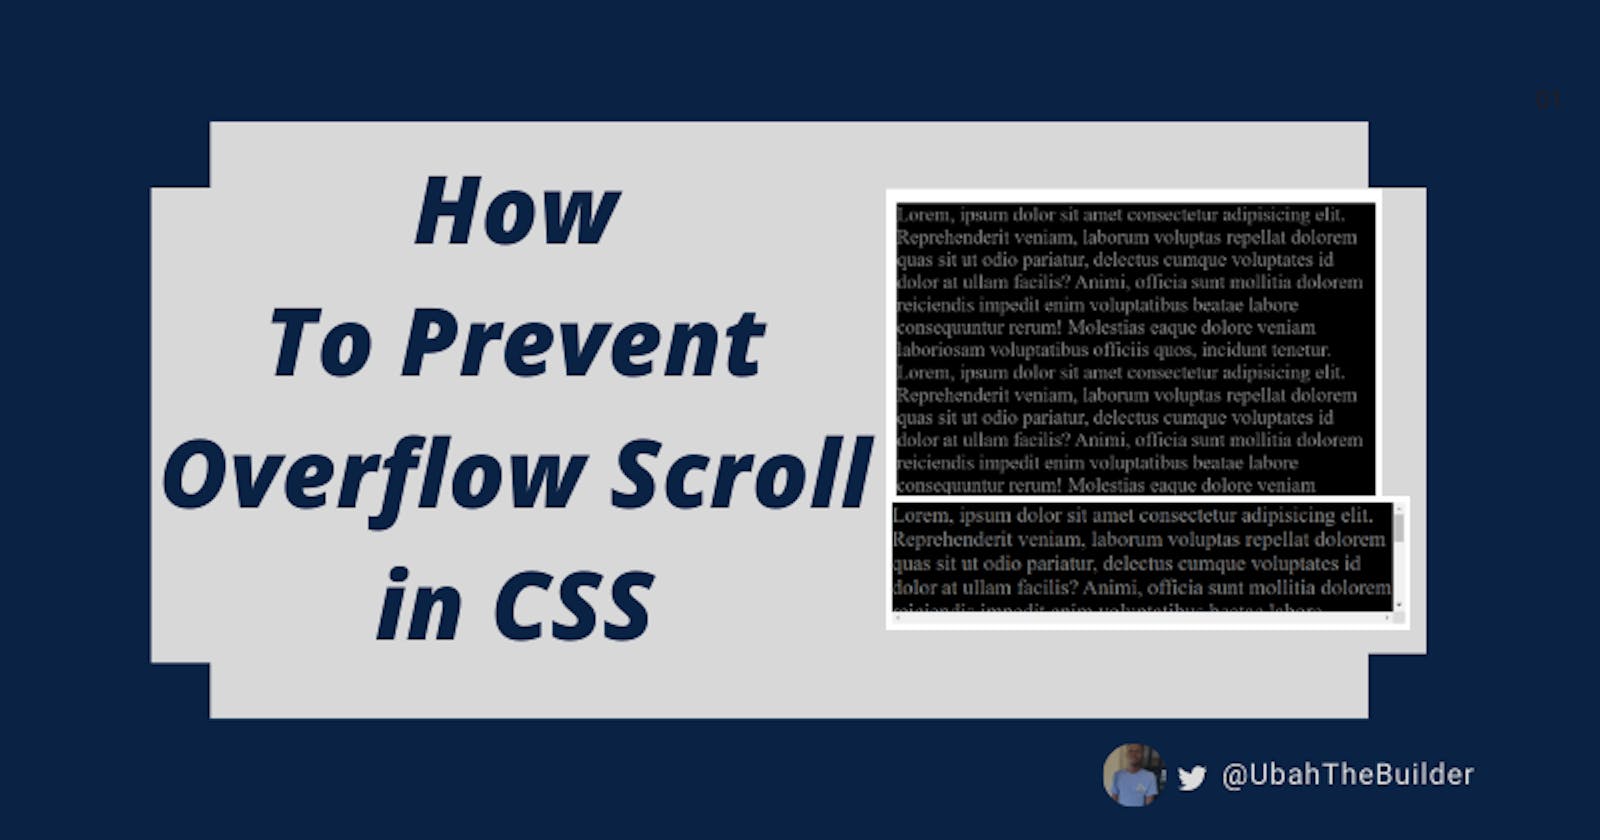 How to Prevent Overflow Scroll in CSS